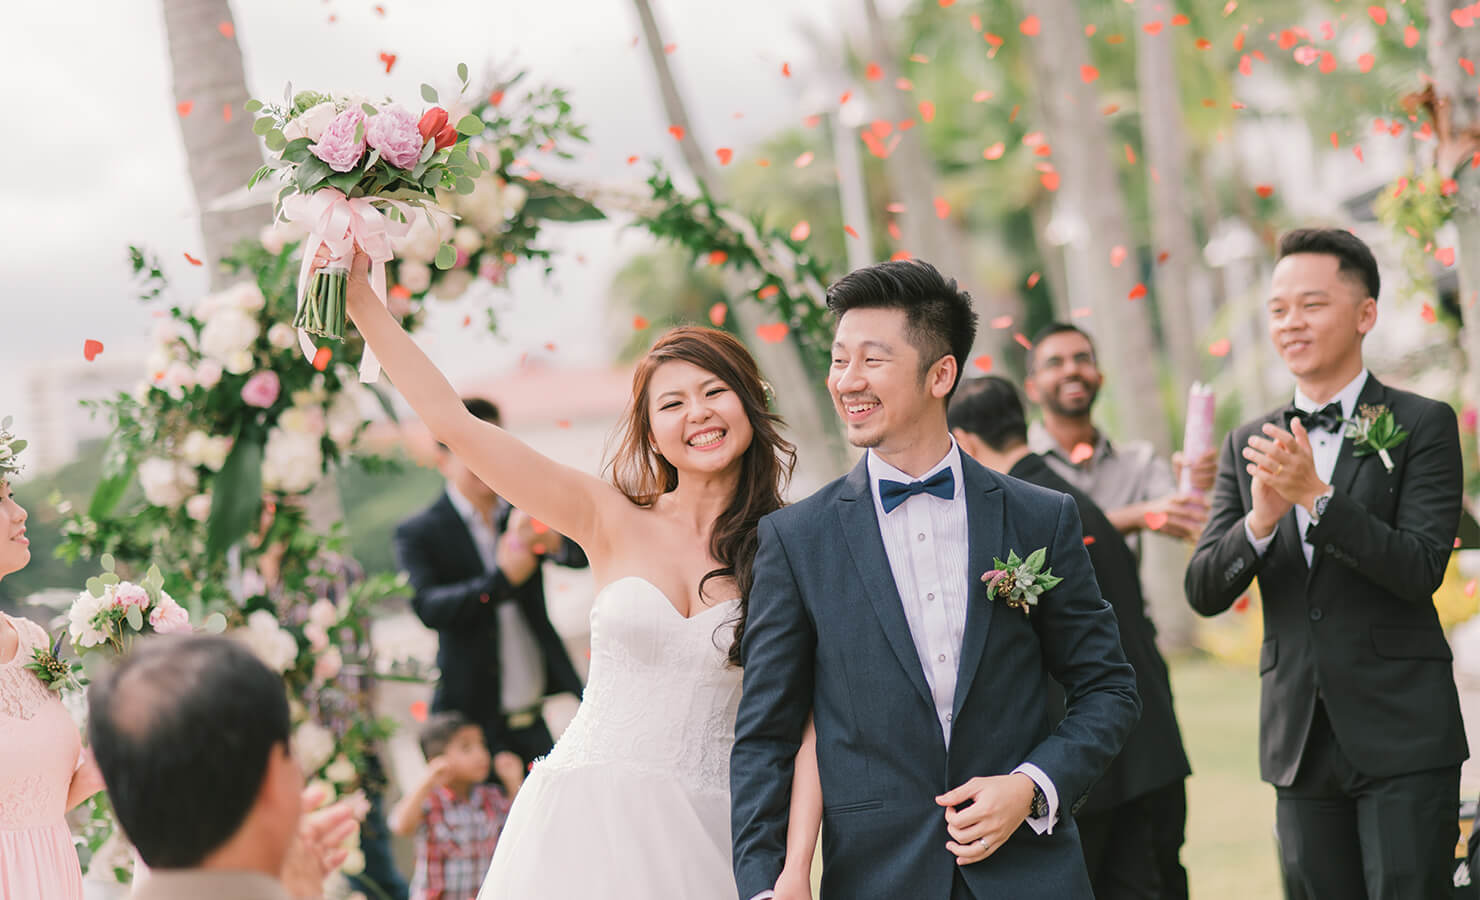 The ultimate guide to choosing the perfect flowers for an IG-worthy wedding